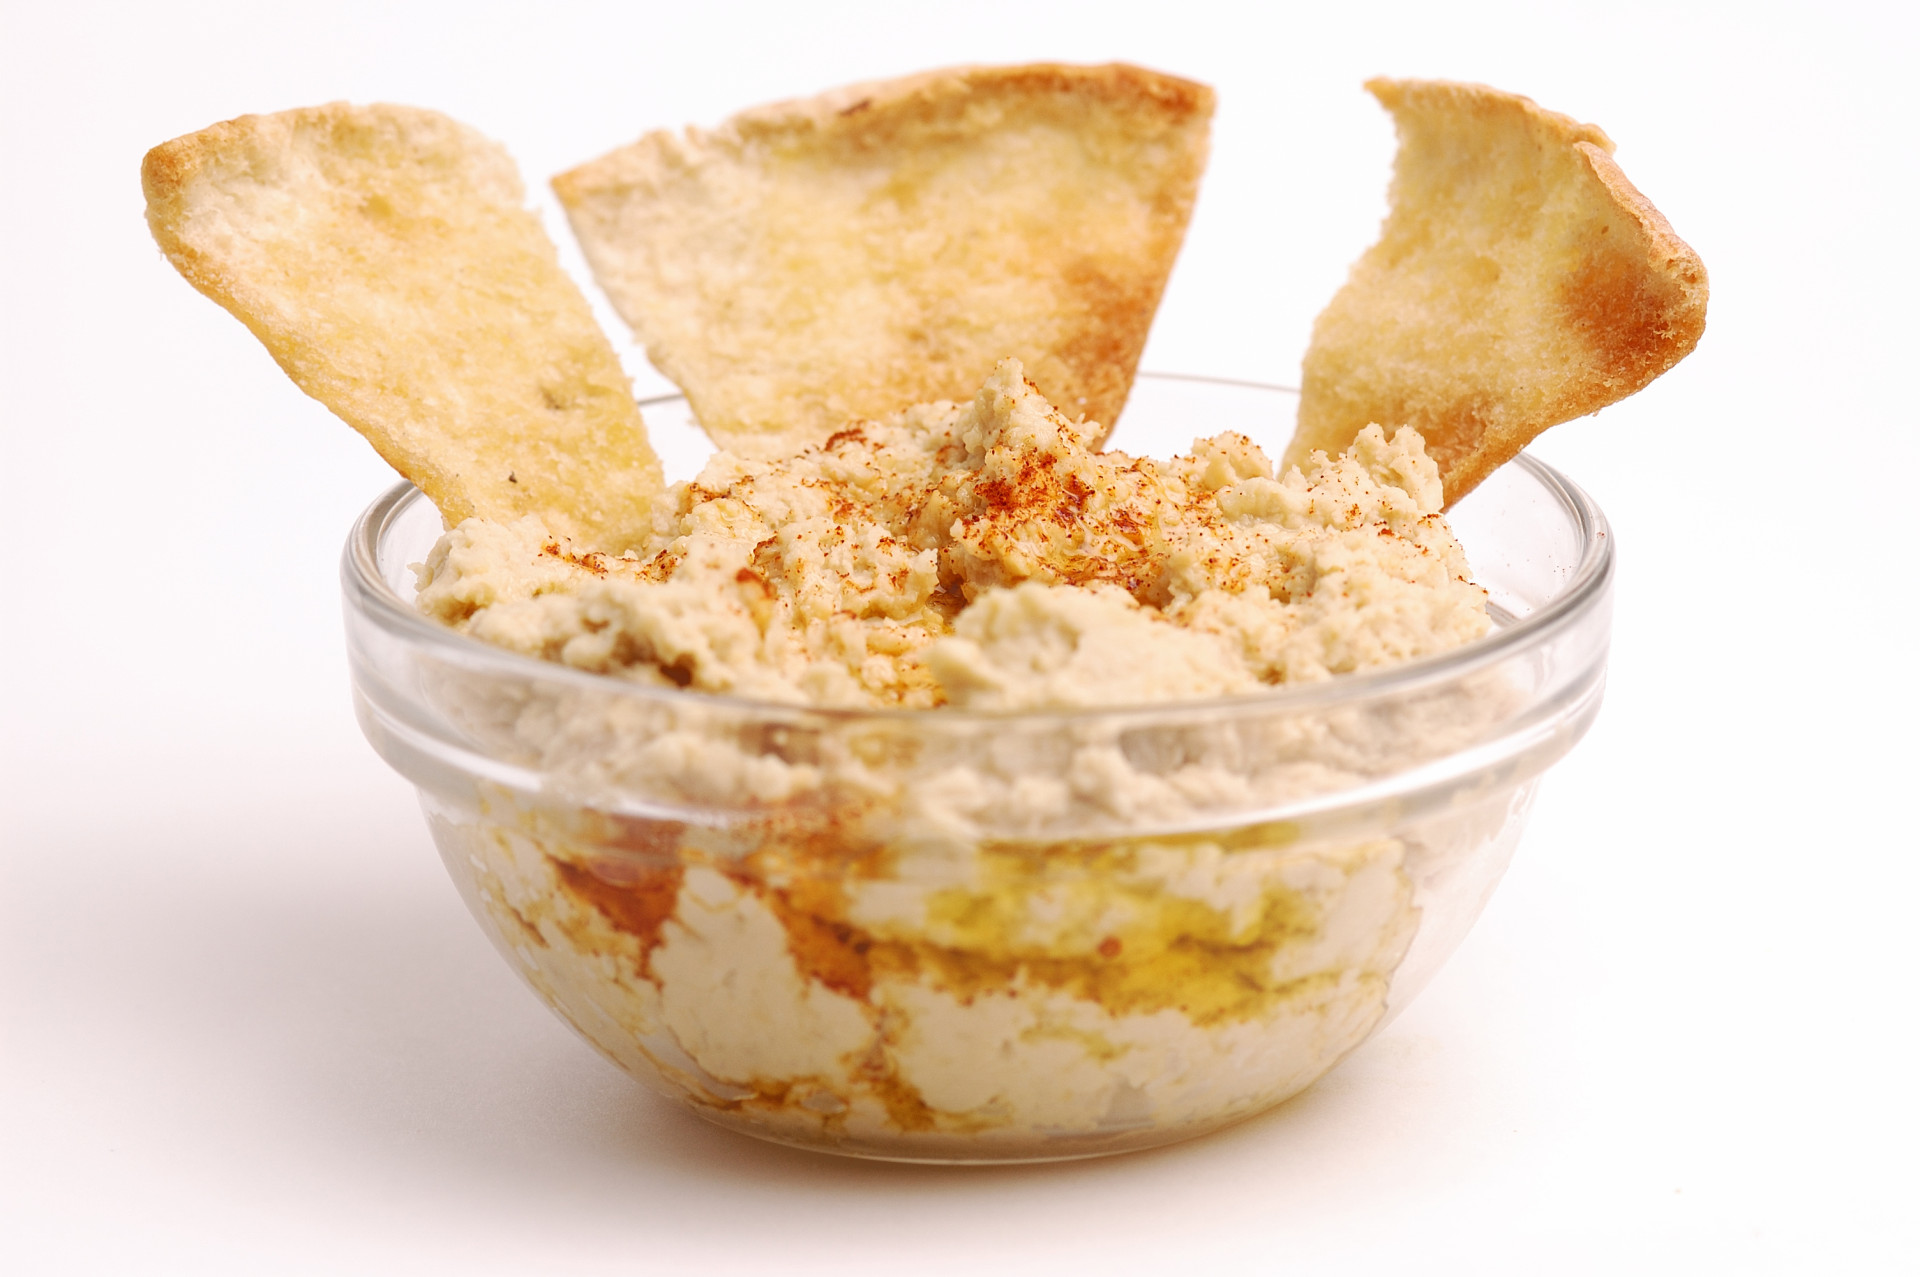 You can get this savory snack prepackaged, or just make your own hummus!<p><a href="https://www.msn.com/en-us/community/channel/vid-7xx8mnucu55yw63we9va2gwr7uihbxwc68fxqp25x6tg4ftibpra?cvid=94631541bc0f4f89bfd59158d696ad7e">Follow us and access great exclusive content every day</a></p>